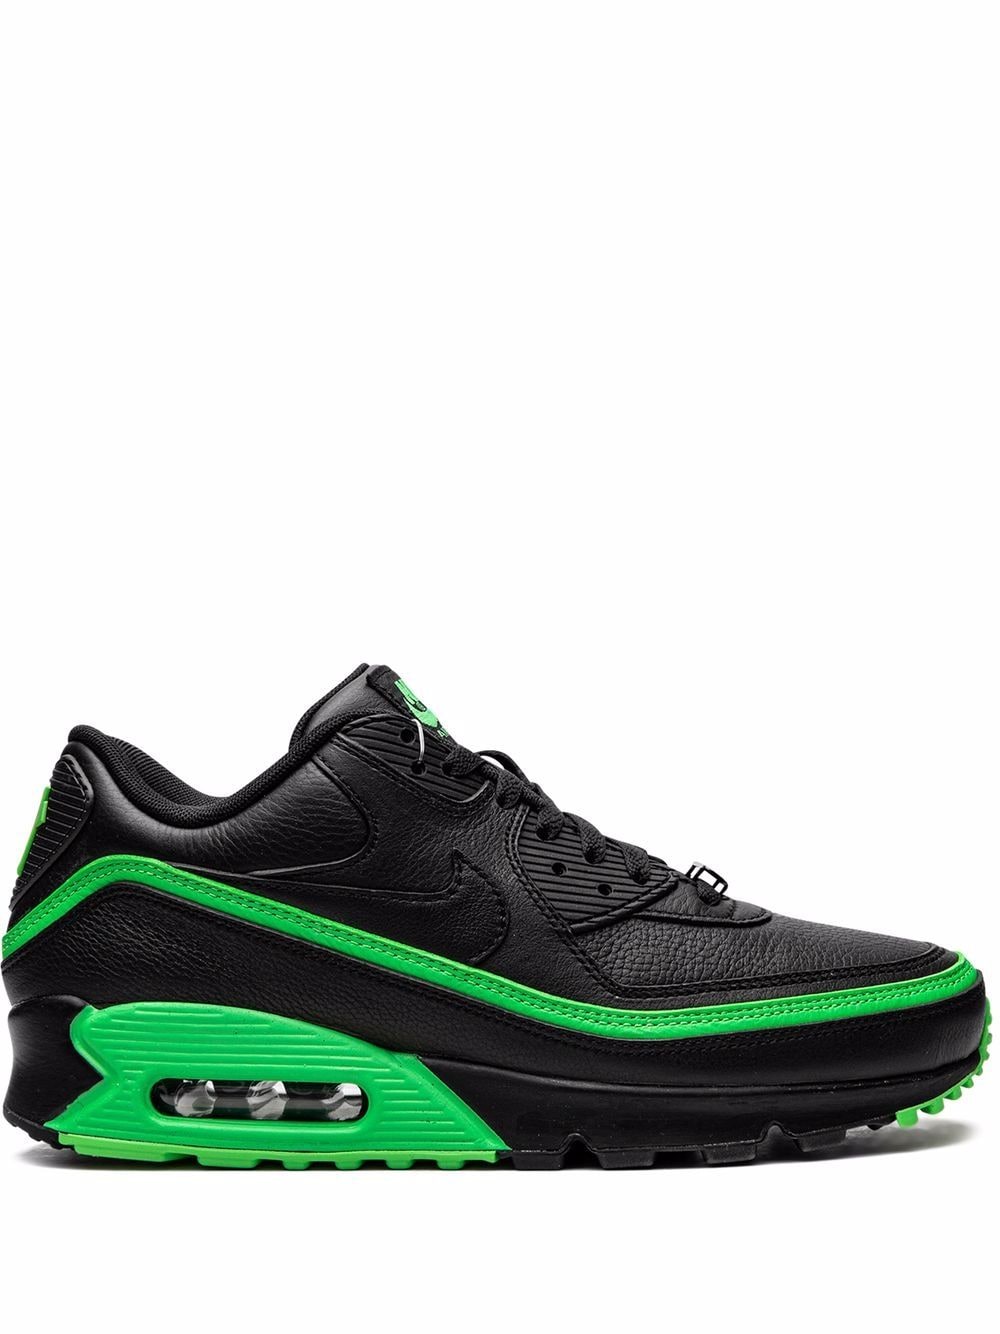 Nike x Undefeated Air Max 90 "Black/Green" sneakers von Nike